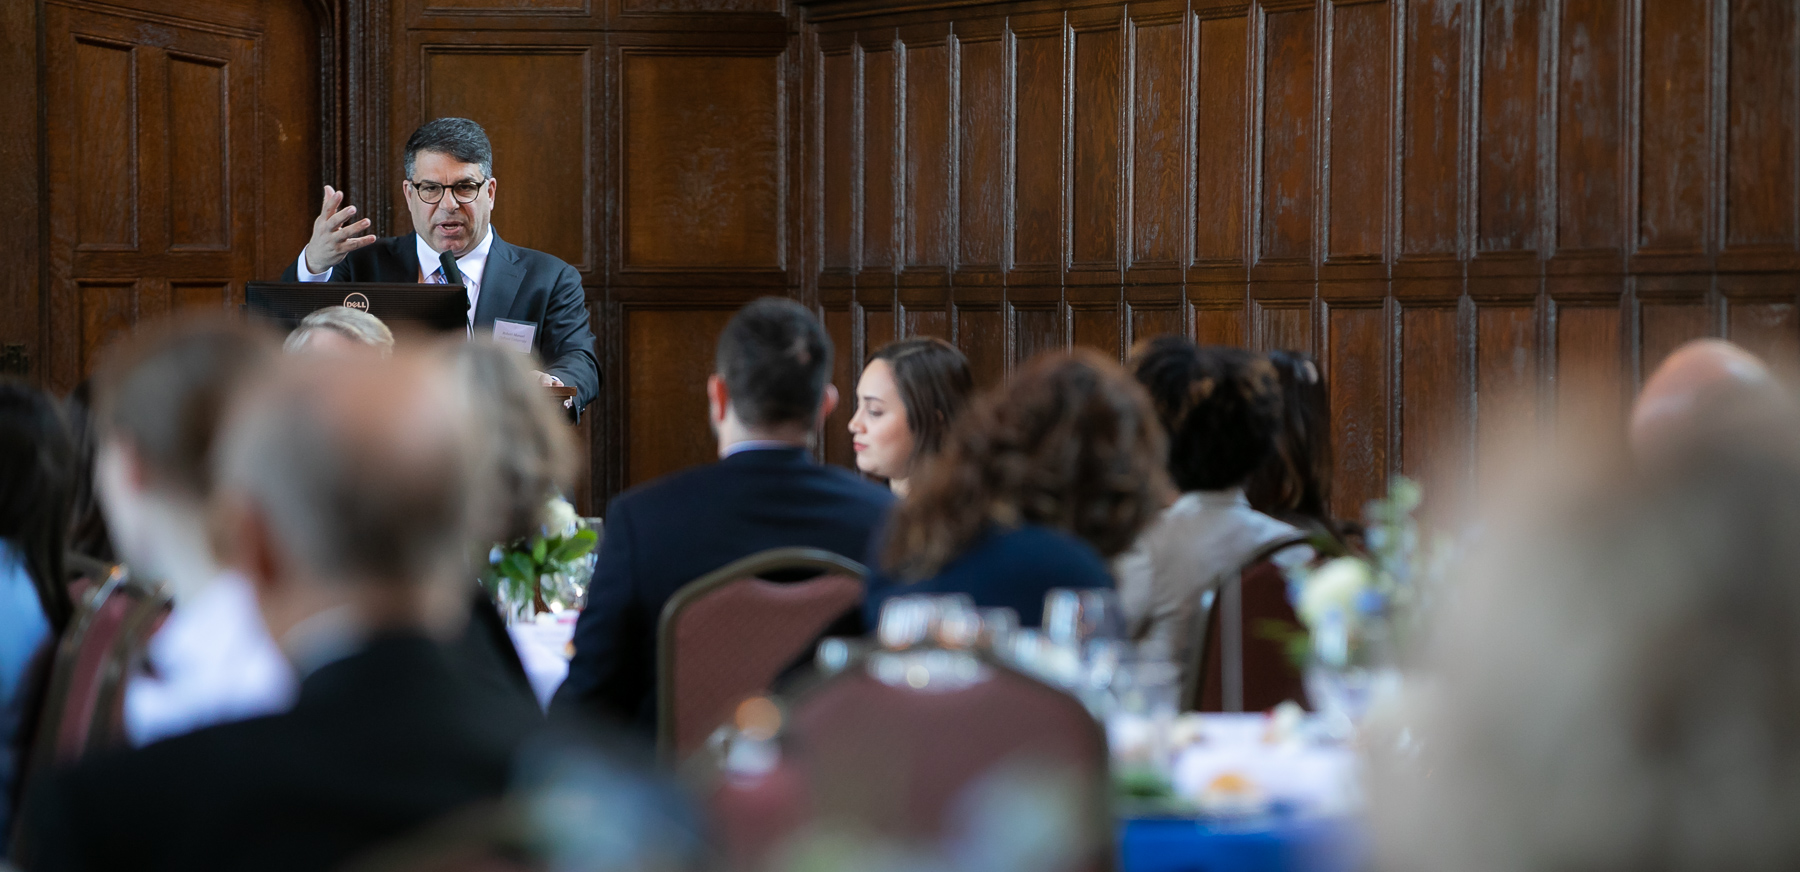 DePaul President Rob Manuel made opening remarks during the Consular Corps Luncheon on April 26.